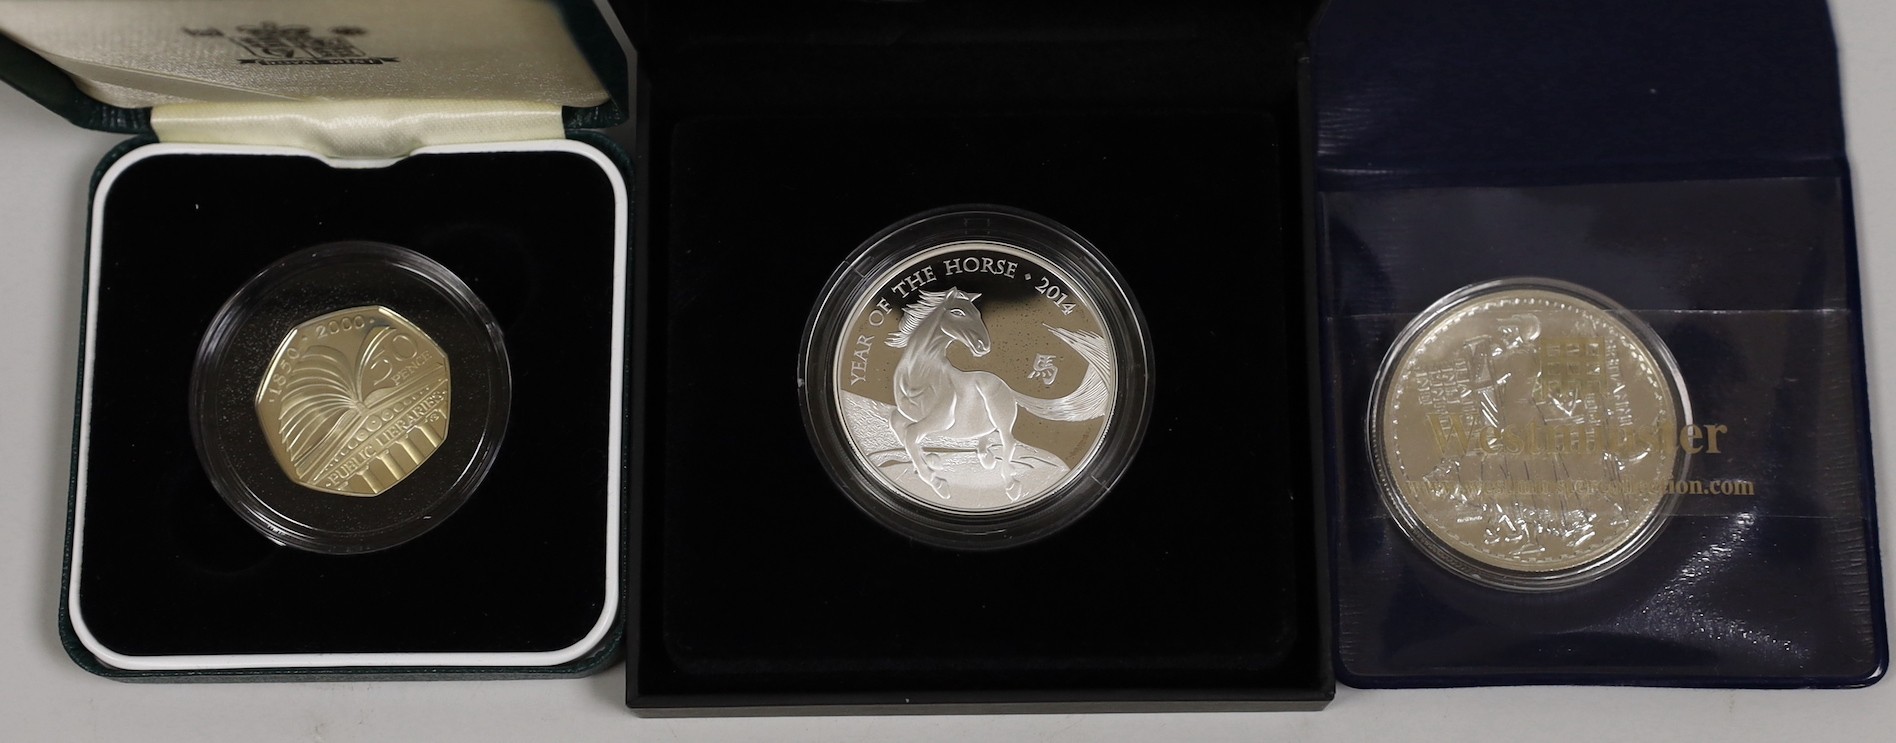 Royal Mint Lunar Year of the Horse 2014 1oz. silver proof coin a 150 years of Public Libraries silver proof 50p 2000 and a Westminster Mint Bill bullion Britannia 1oz coin.